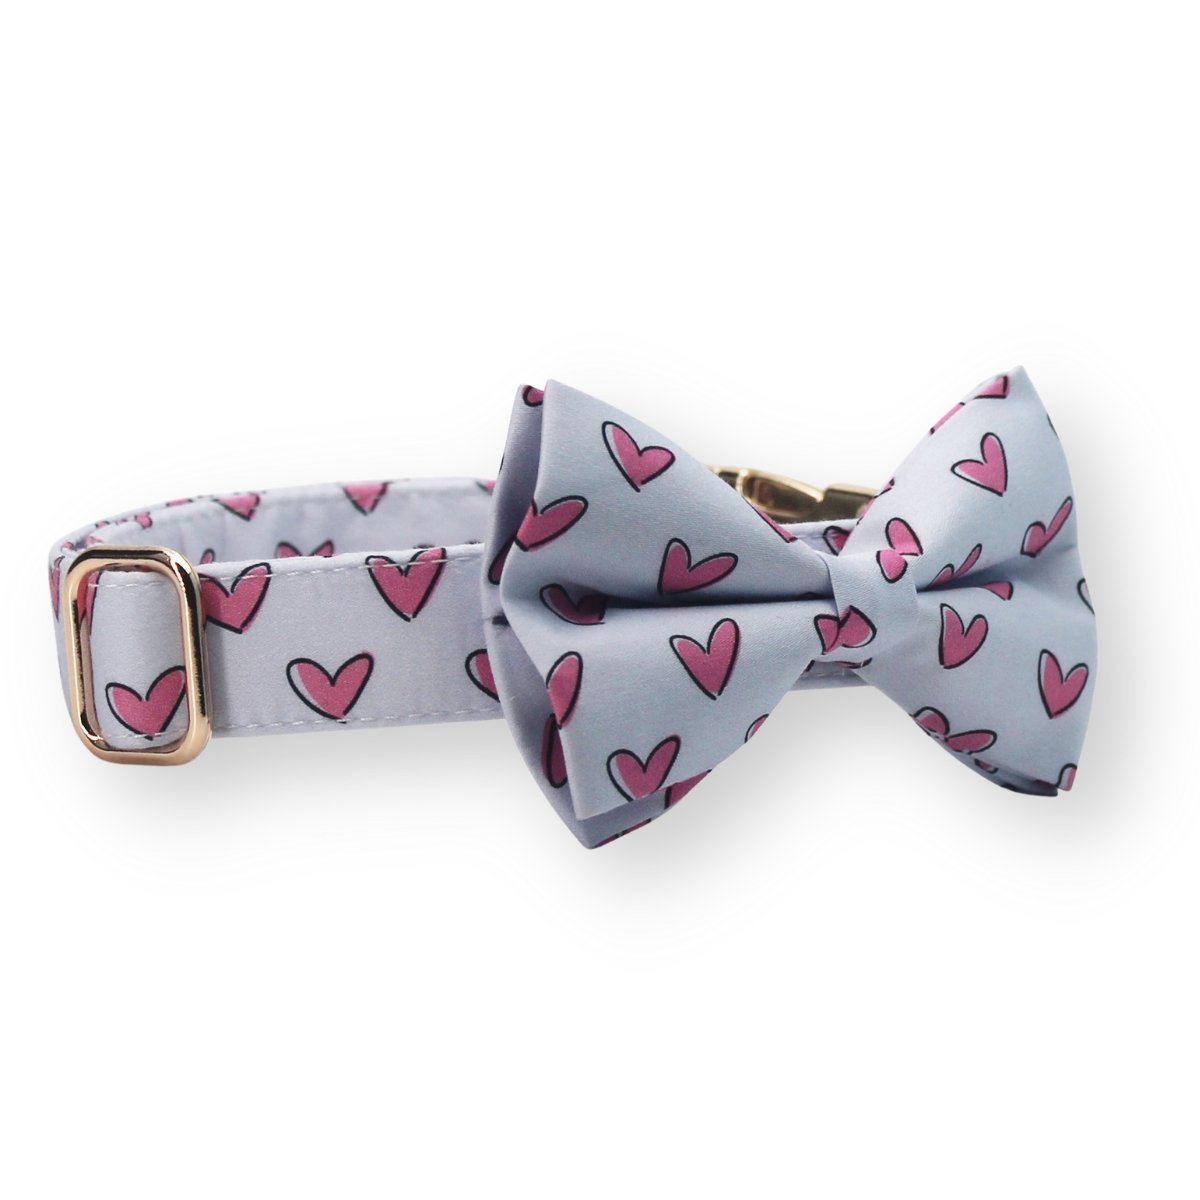 designer dog collars with bow tie for girls and boys - Heart pattern collars for dogs - Best dog bow tie collars for dogs